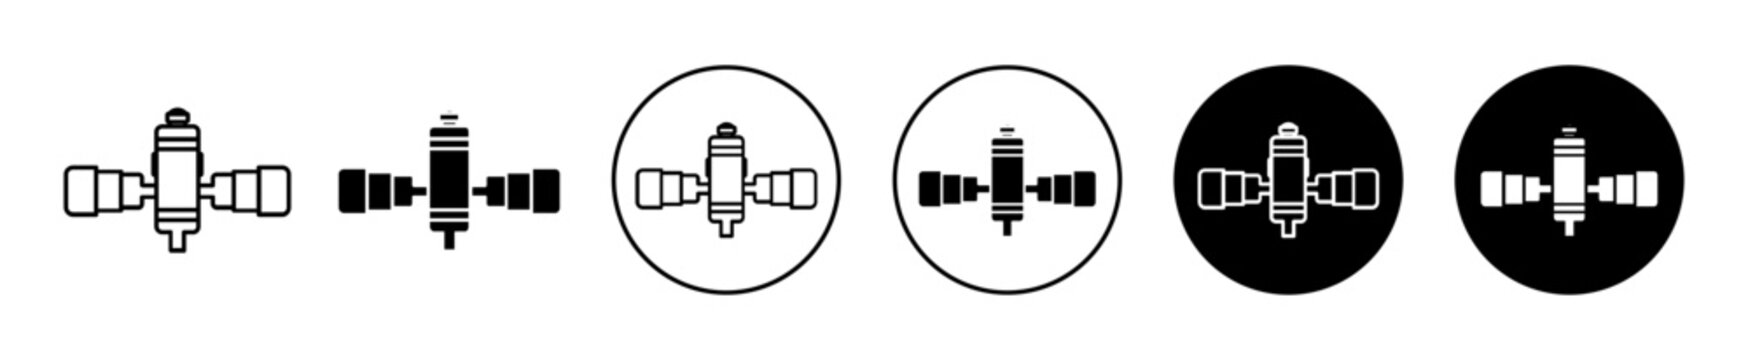 International space station vector icon set. In black filled and outlined style for UI designs.